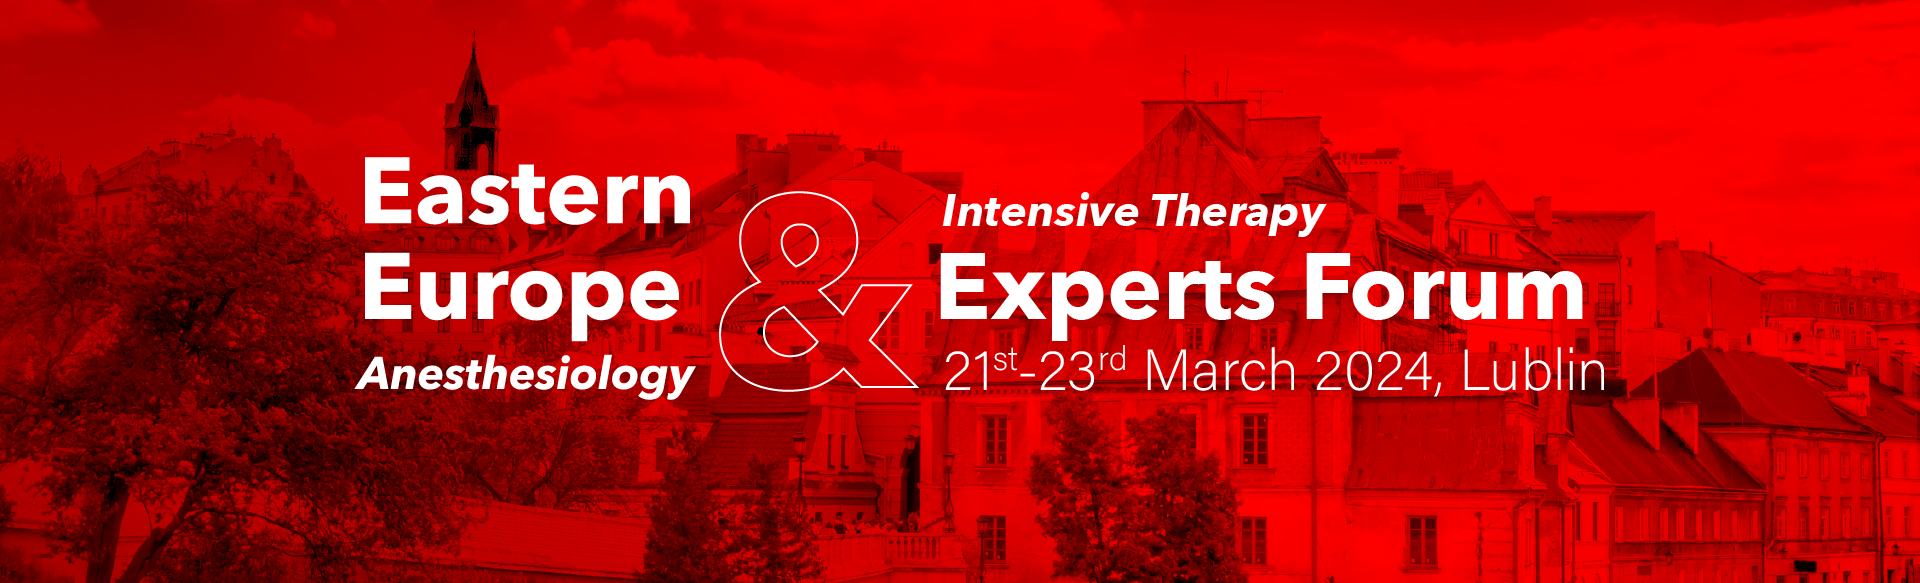 Eastern Europe Anesthesiology and Intensive Therapy Experts Forum